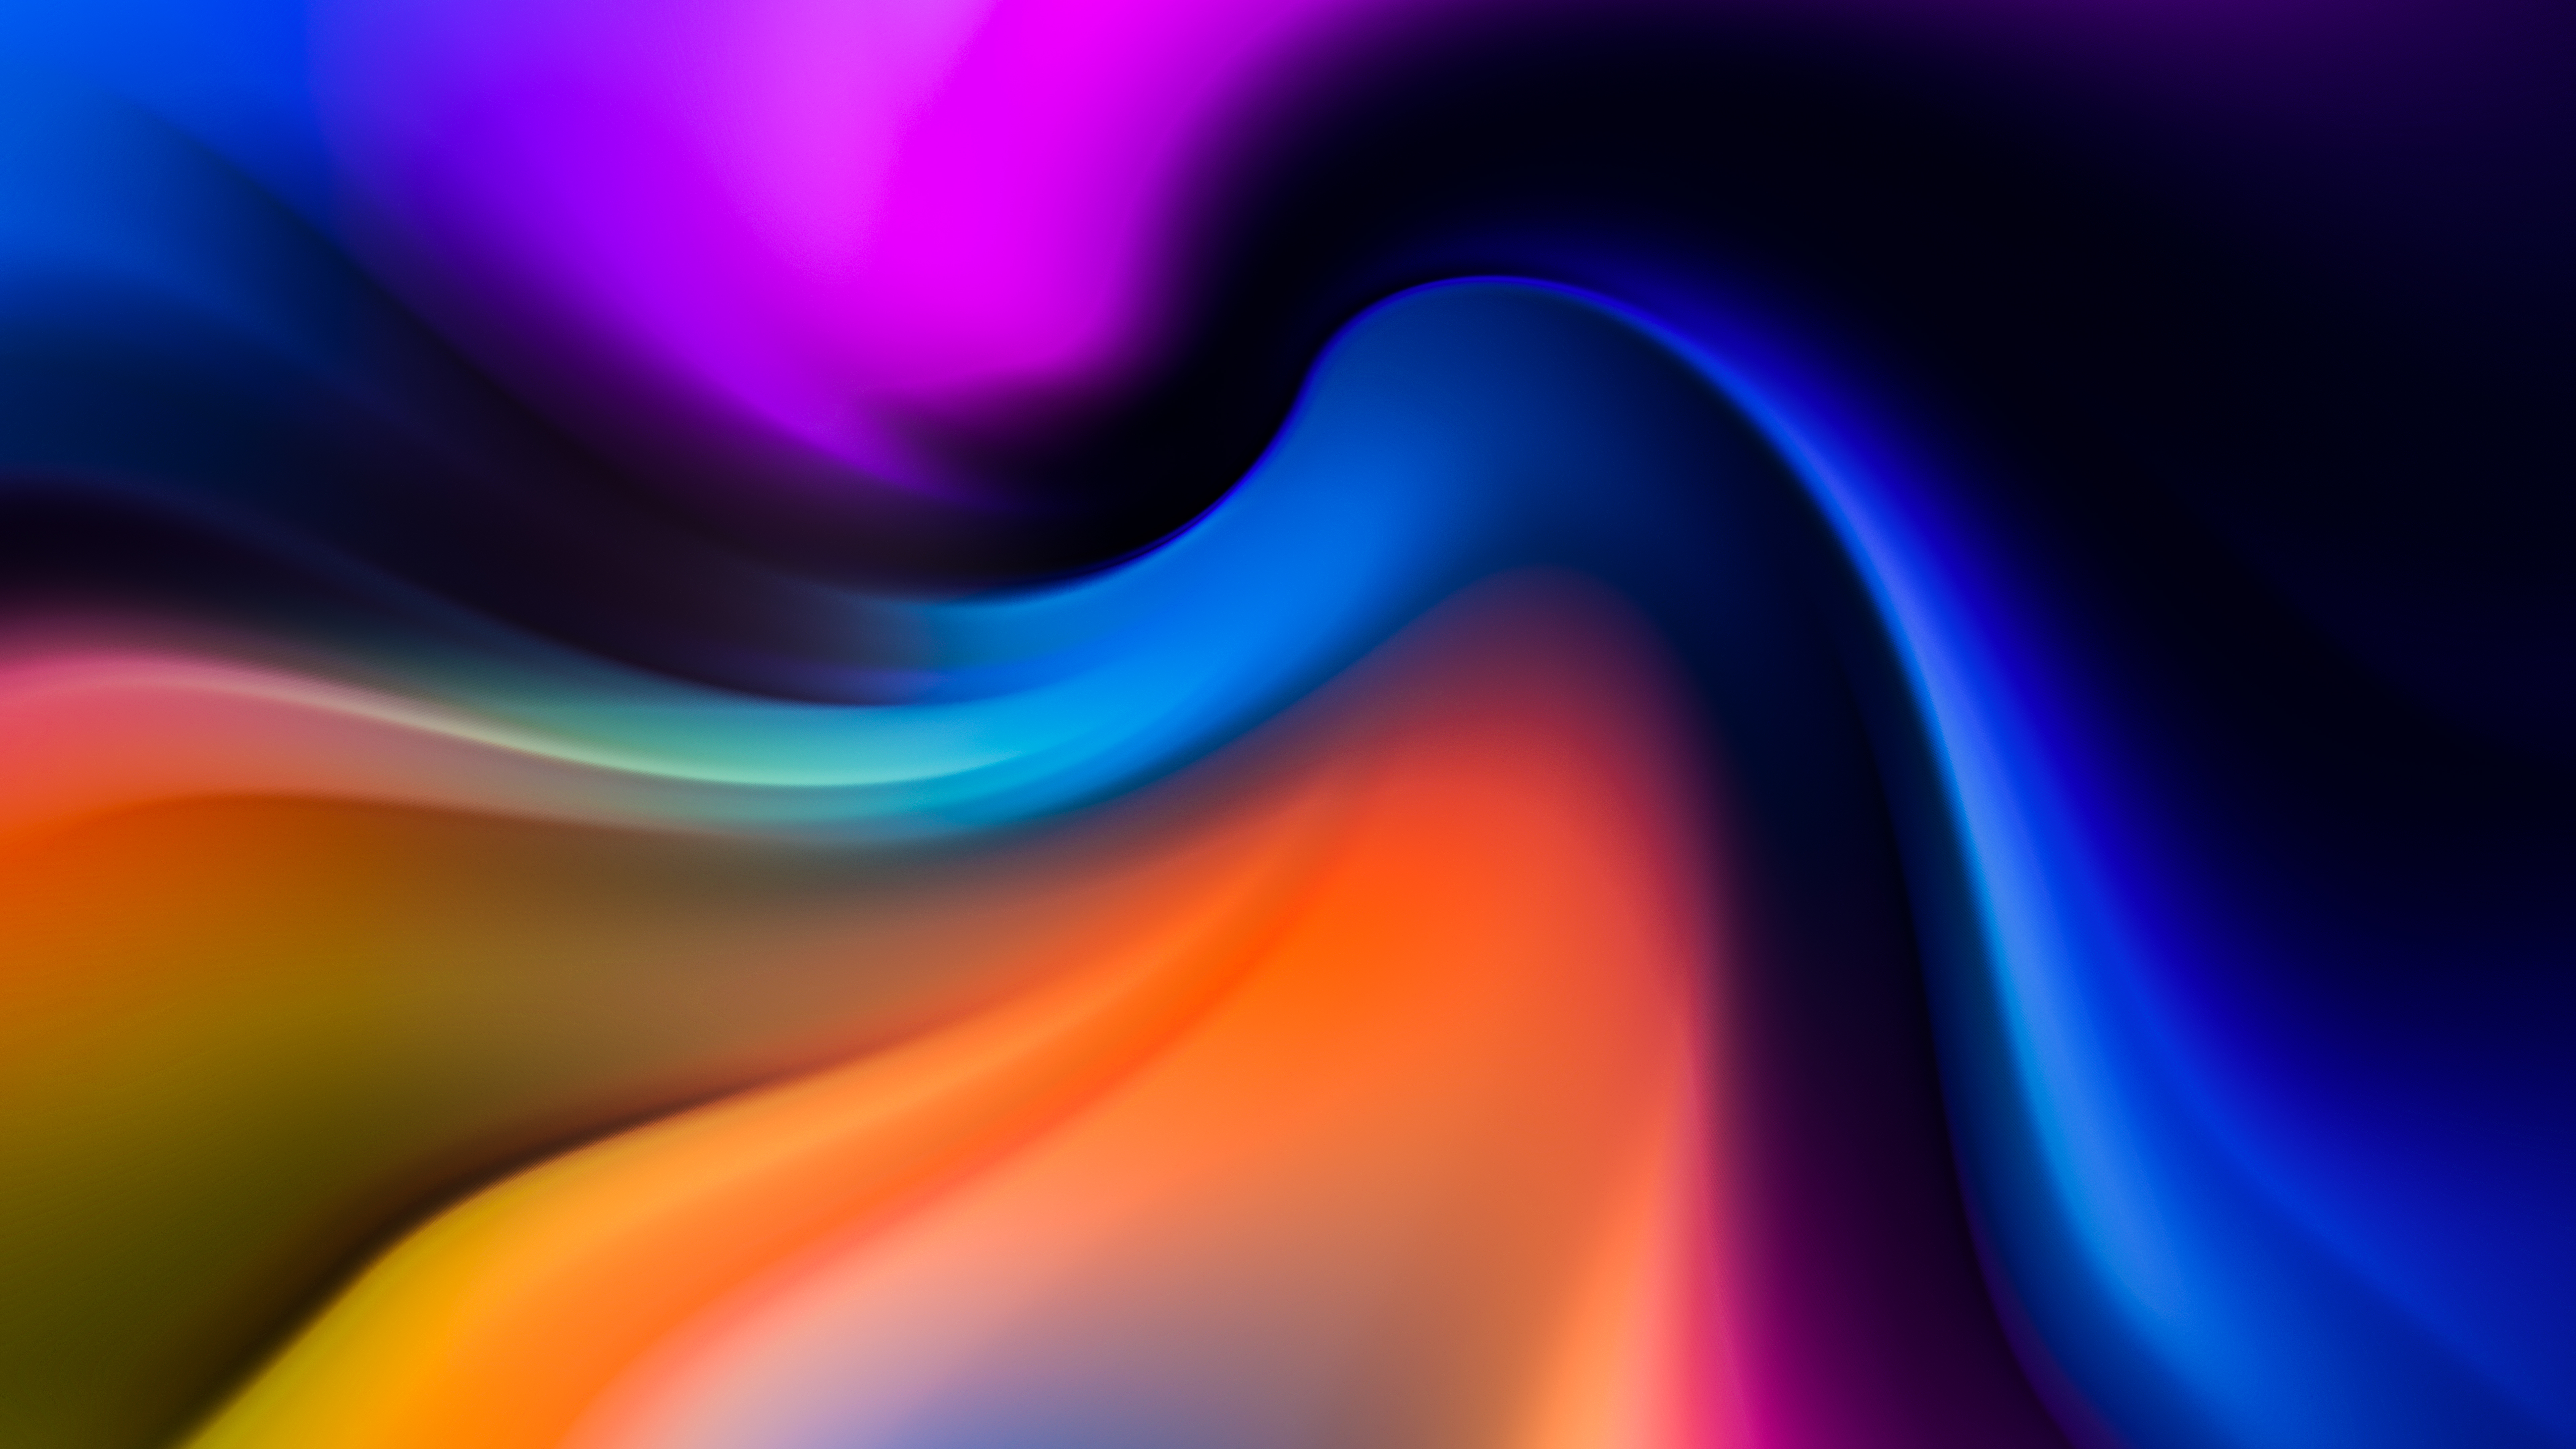 Digital Art Abstract Colorful Blue 7680x4320